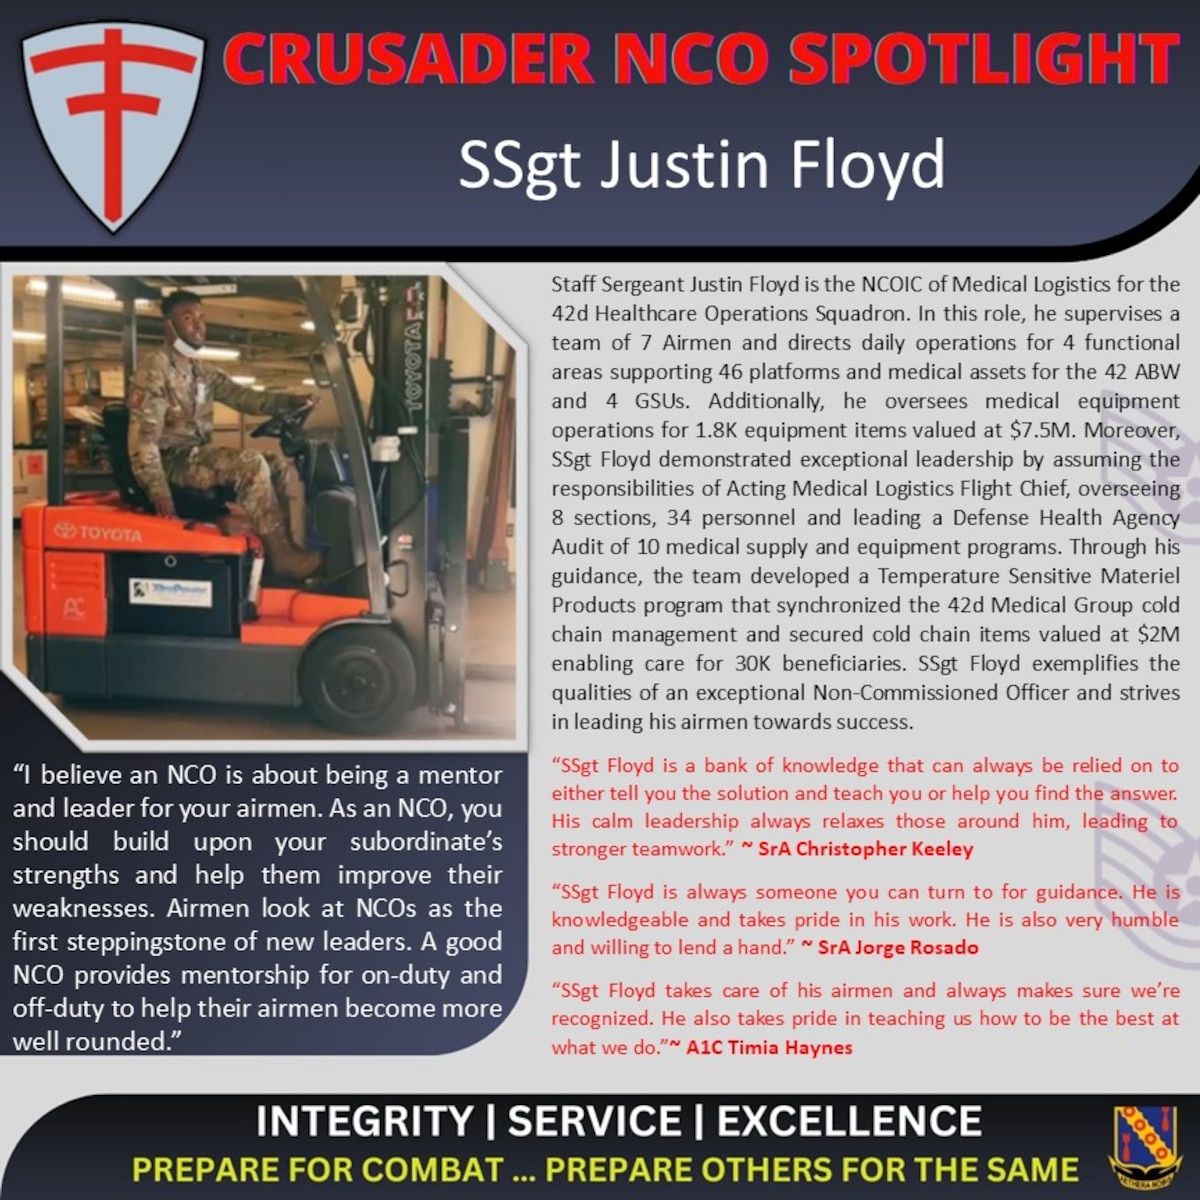 U.S. Air Force Staff Sgt. Justin Floyd, 42nd Healthcare Operations Squadron, is featured in the Crusader NCO Spotlight during the month of May at Maxwell Air Force Base, Ala.